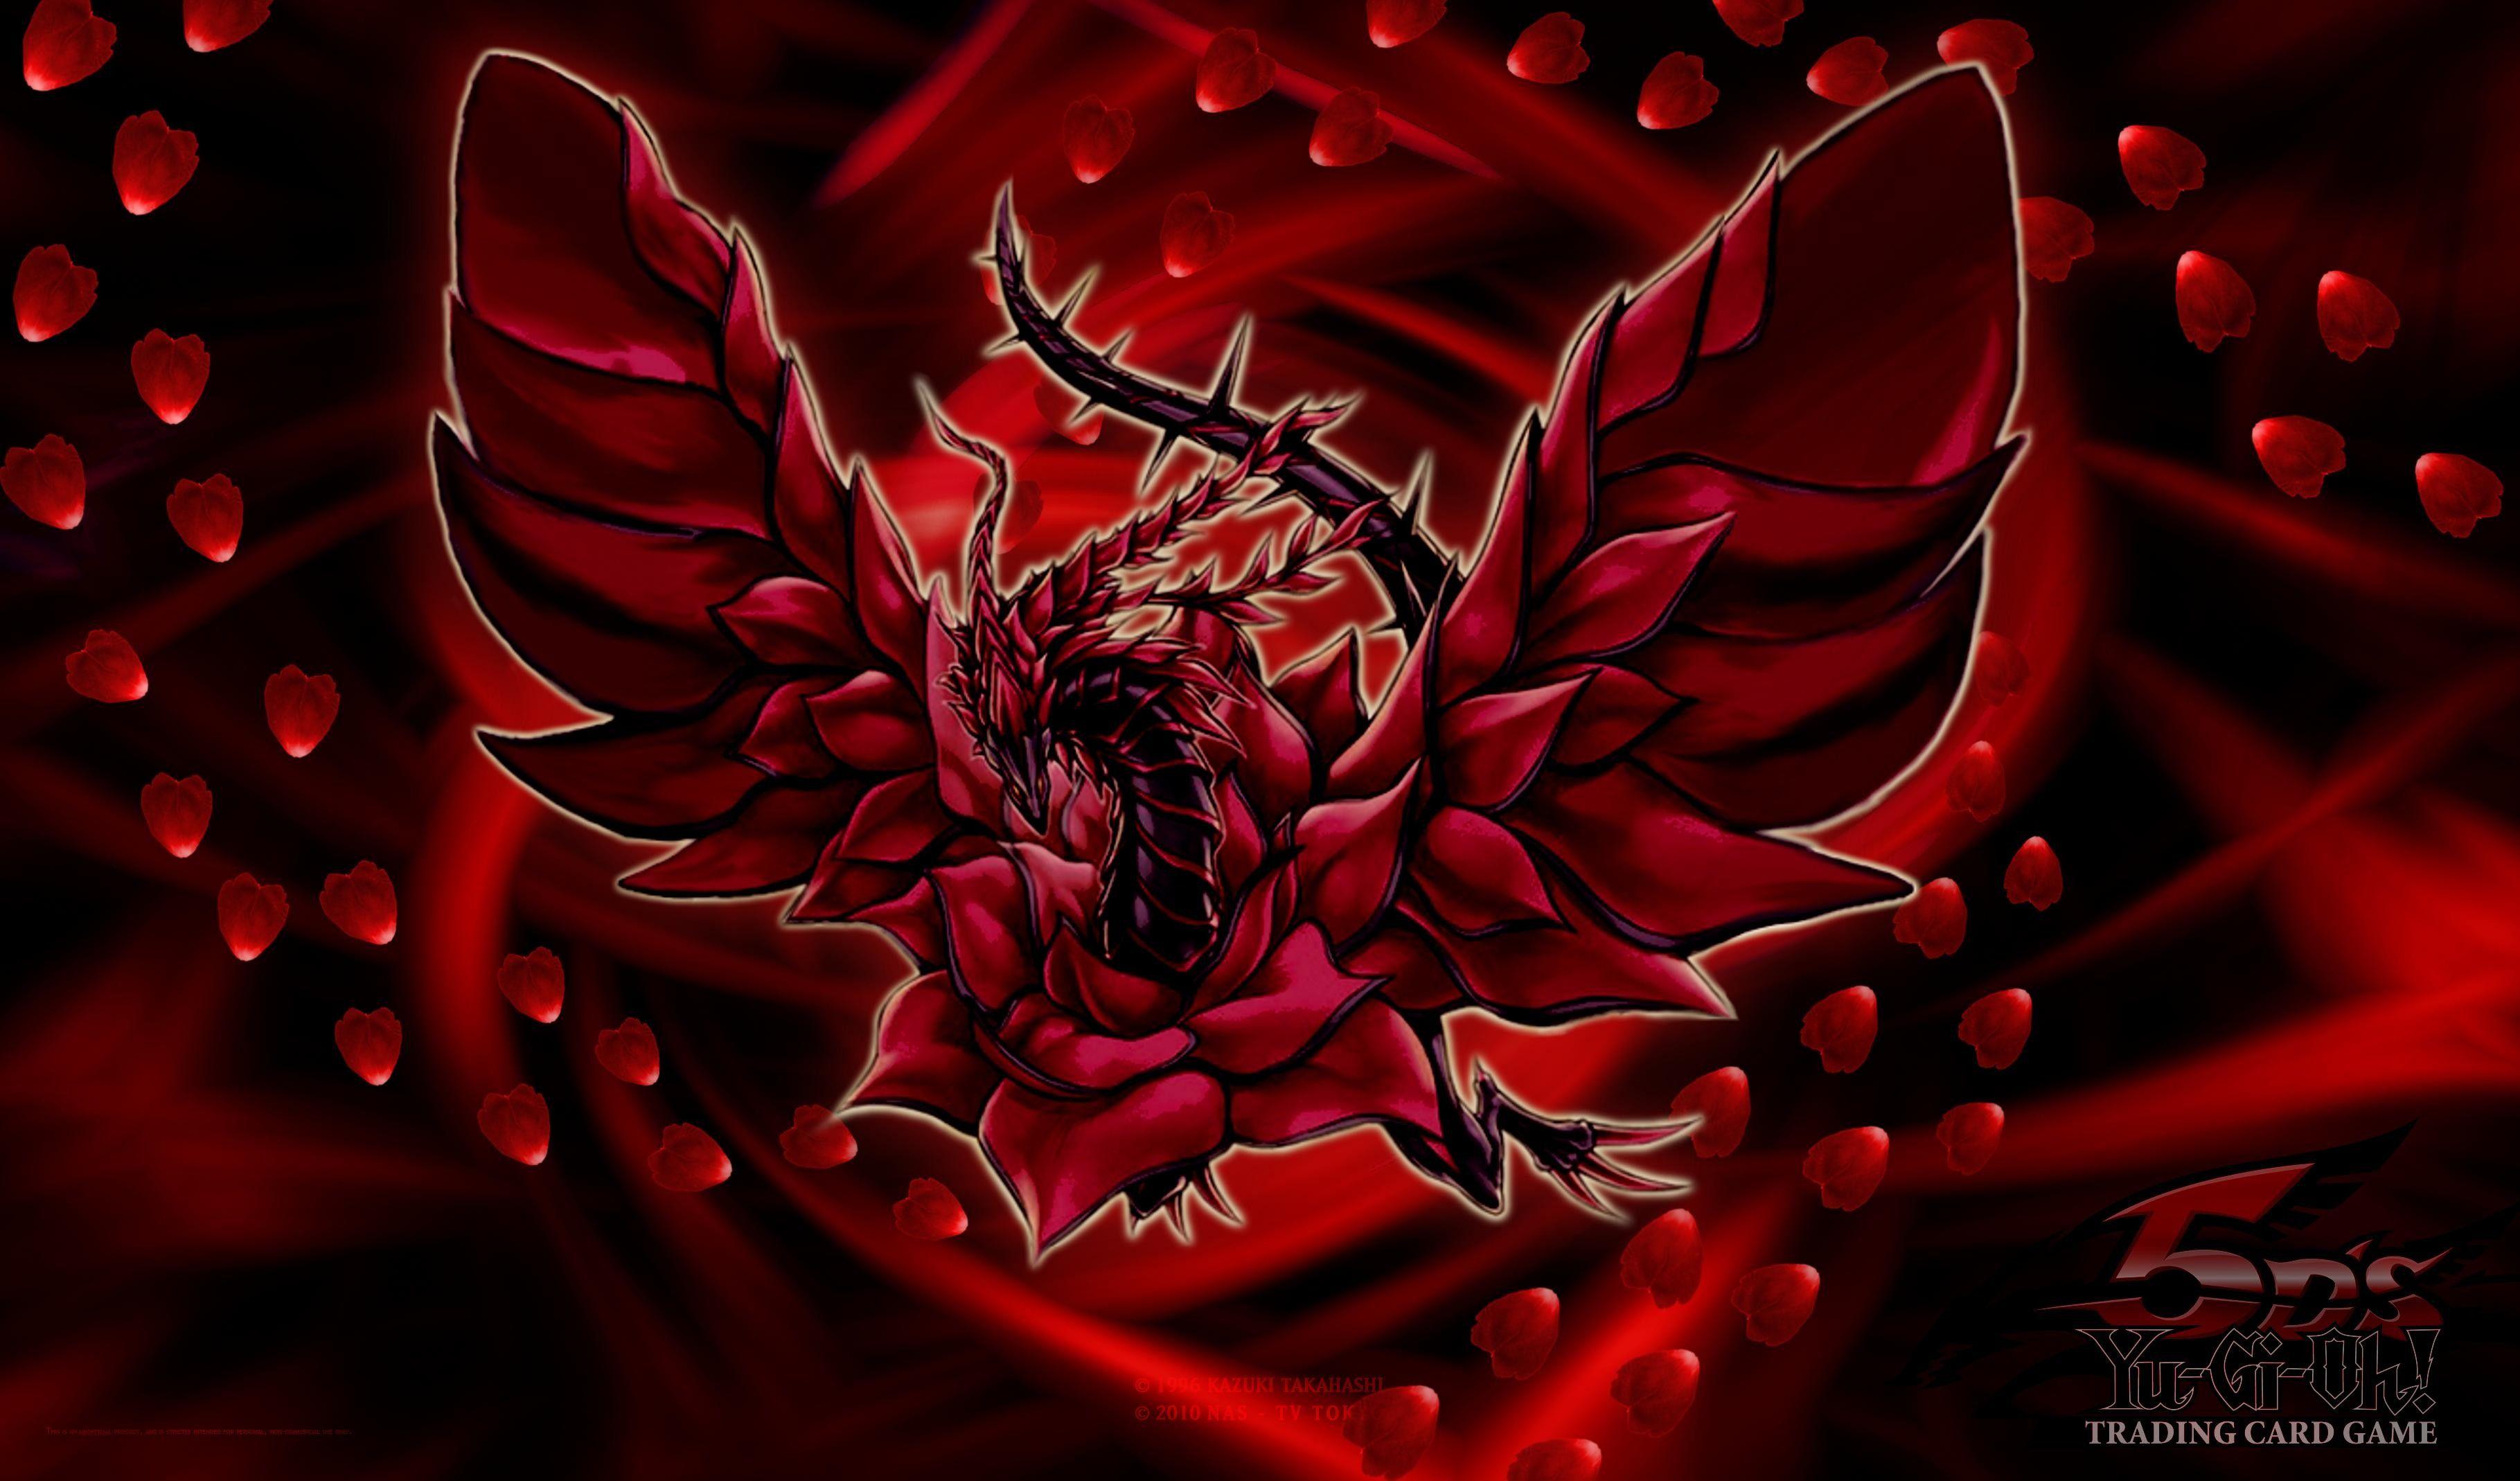 Yugioh Slifer The Sky Dragon Wallpaper background picture